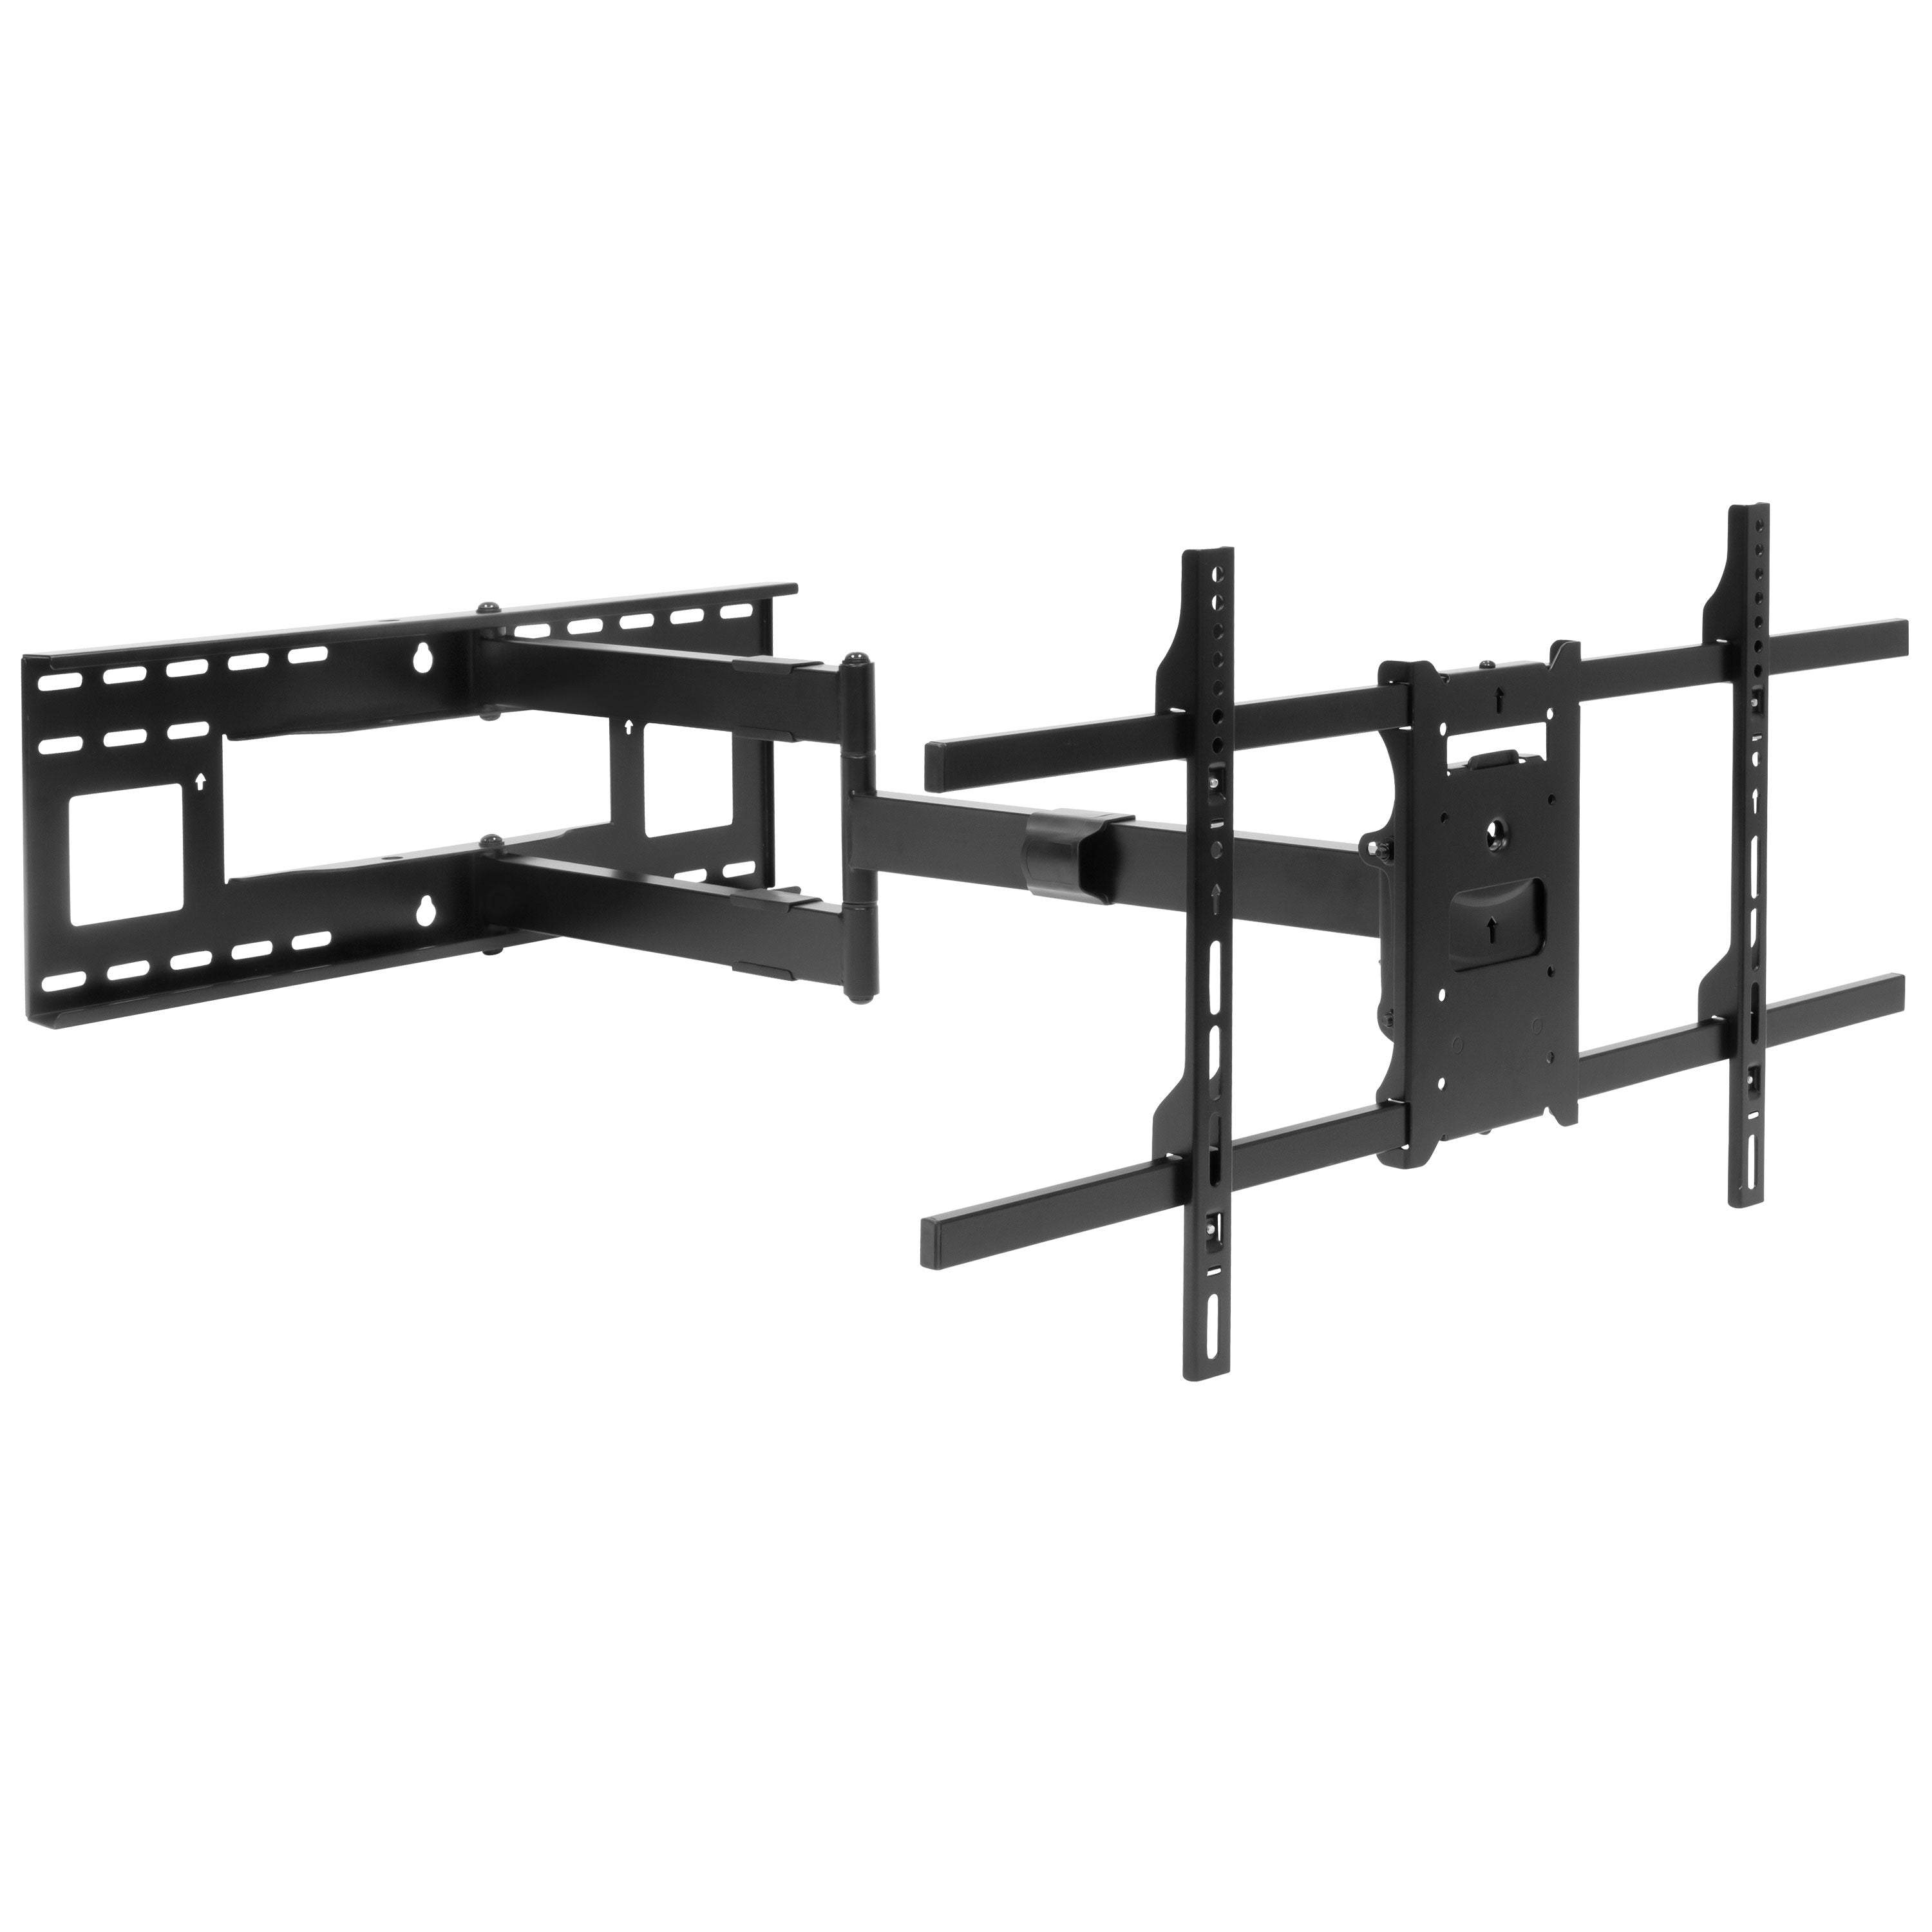 Full-Motion Wall Mount with Extra-Long Extension